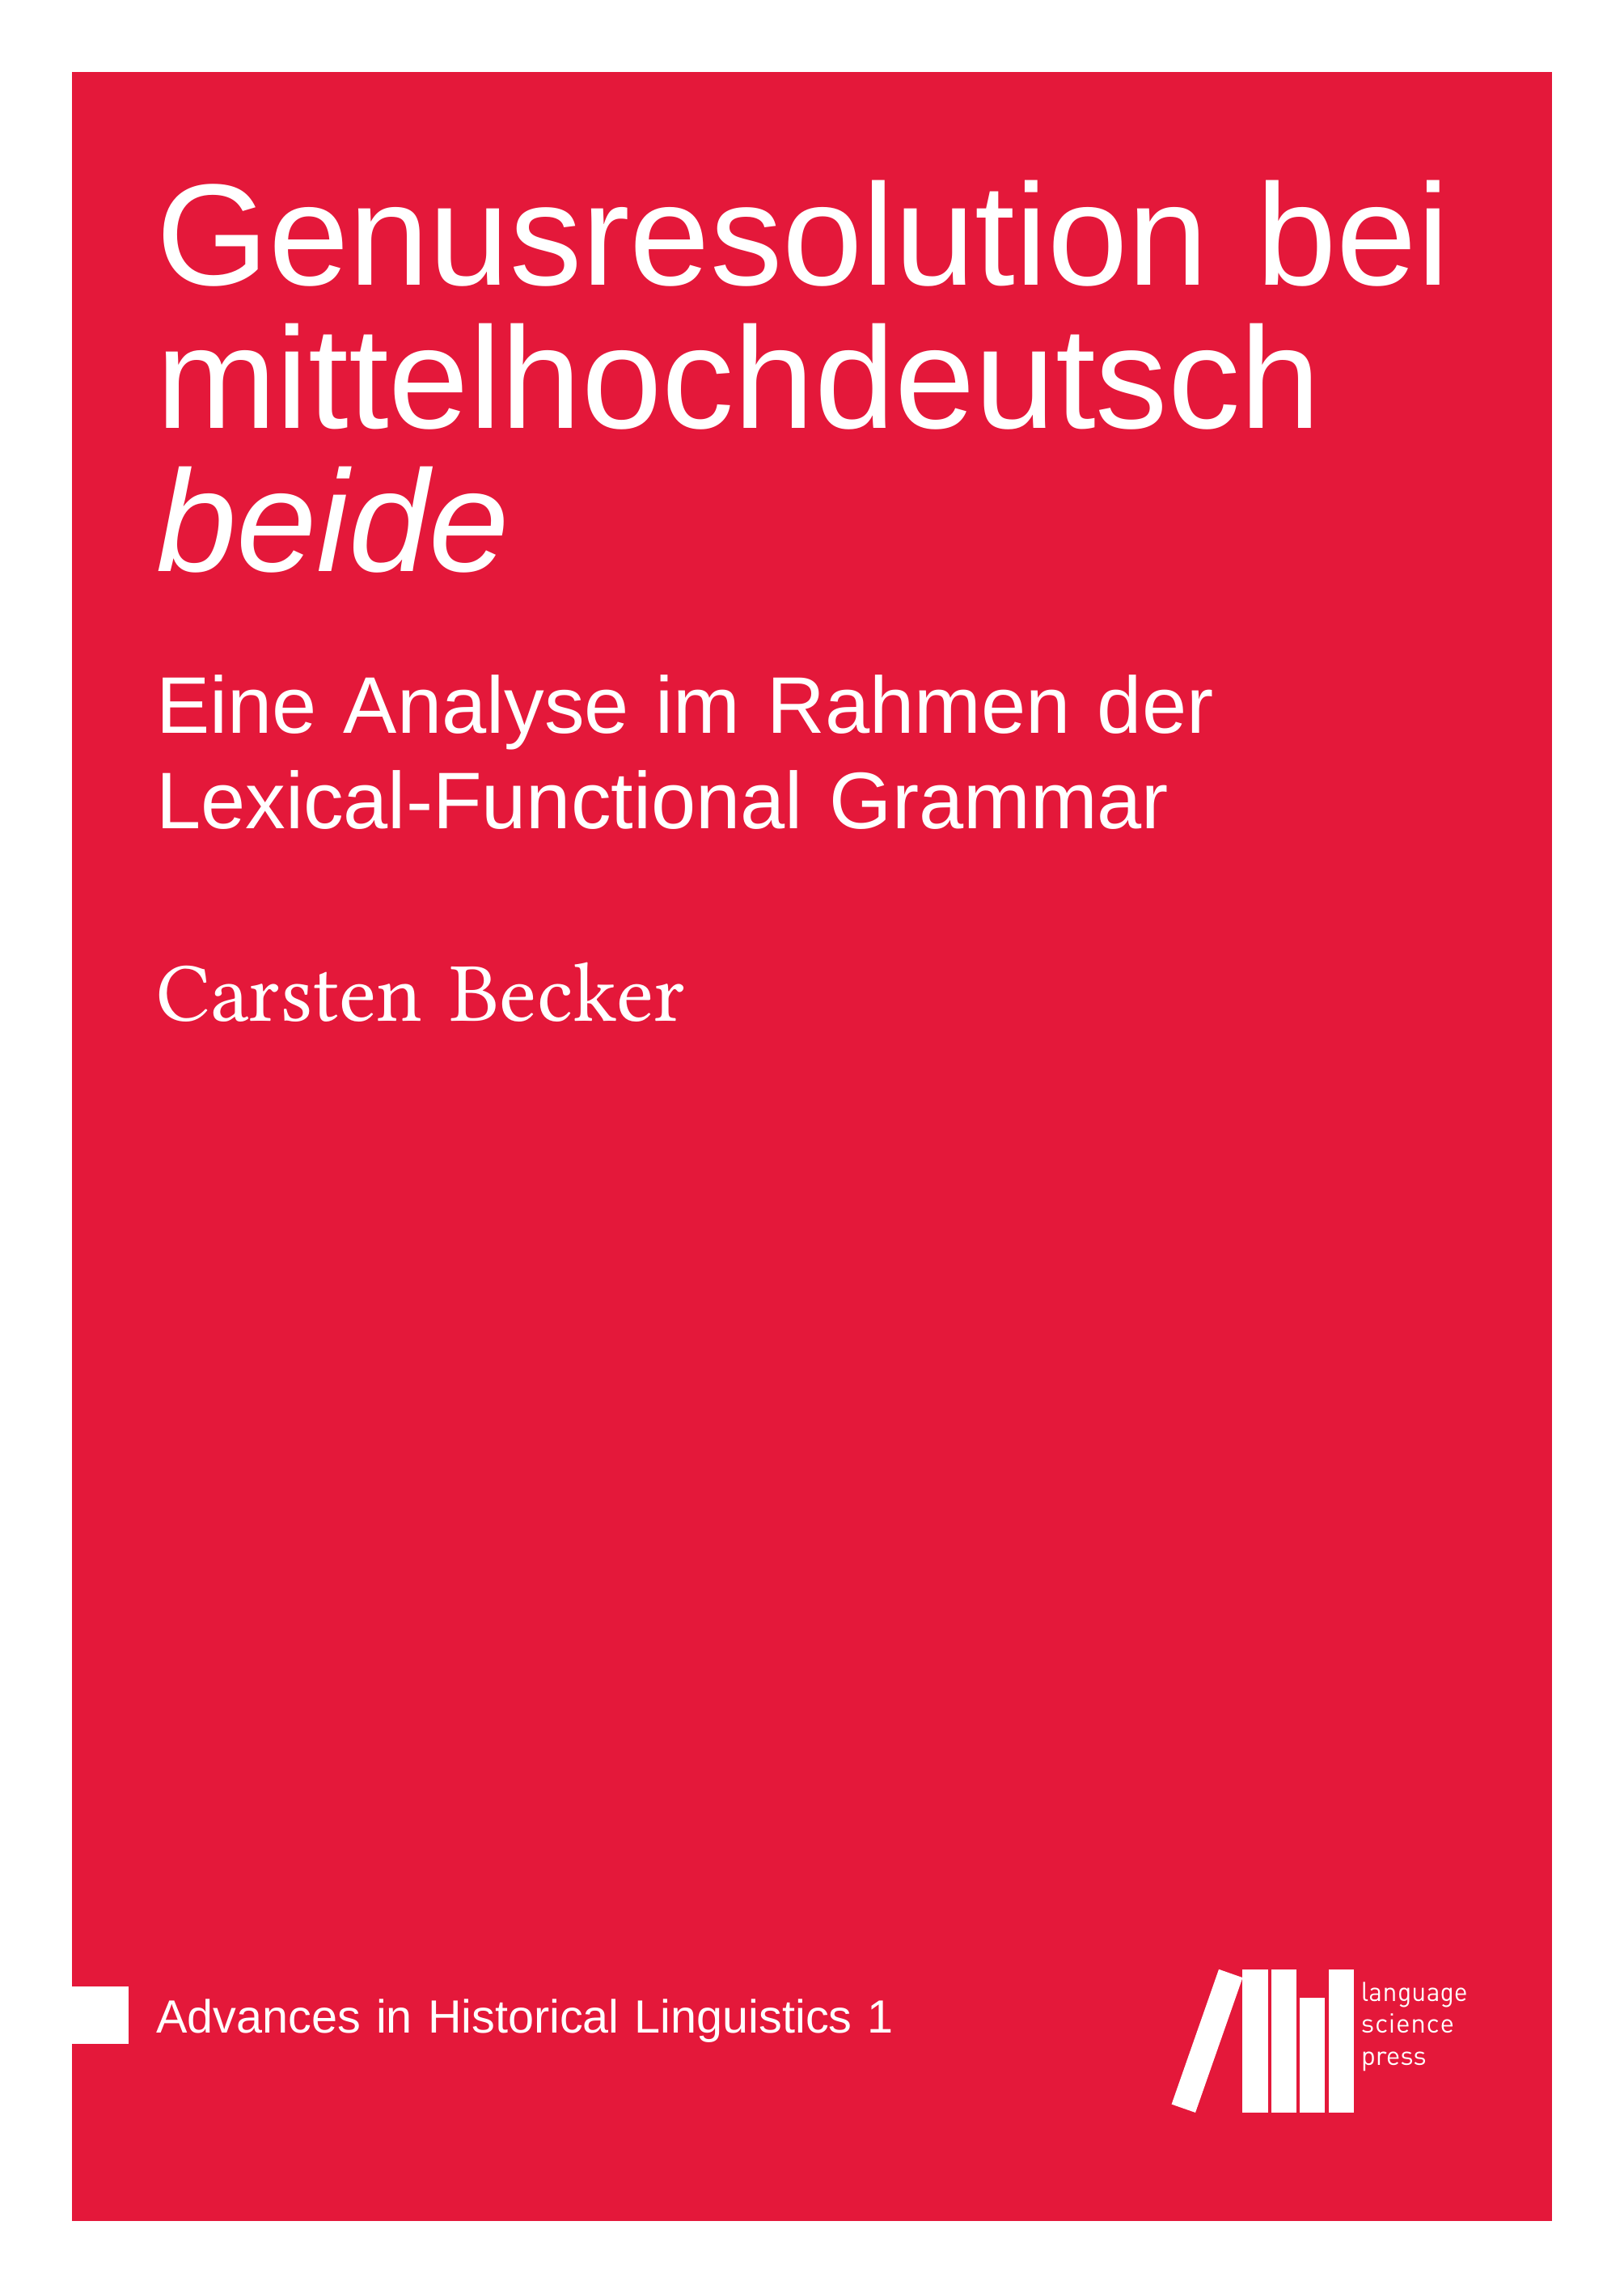 Cover of the book: A simple, text-oriented design stating the author, title, and series information in white on a cool red background